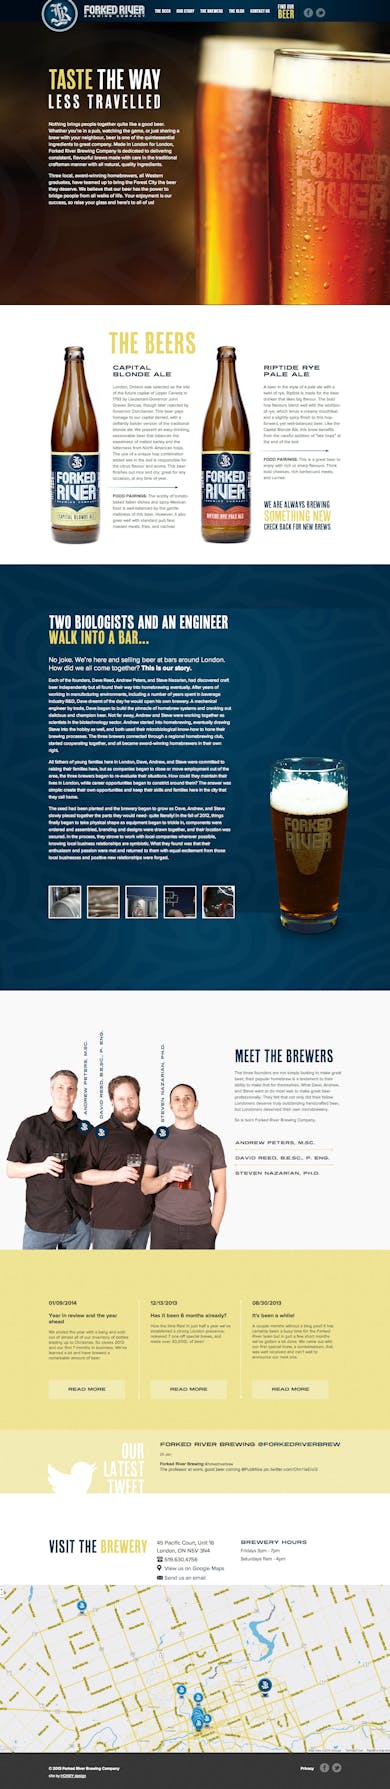 Forked River Brewing Company Thumbnail Preview